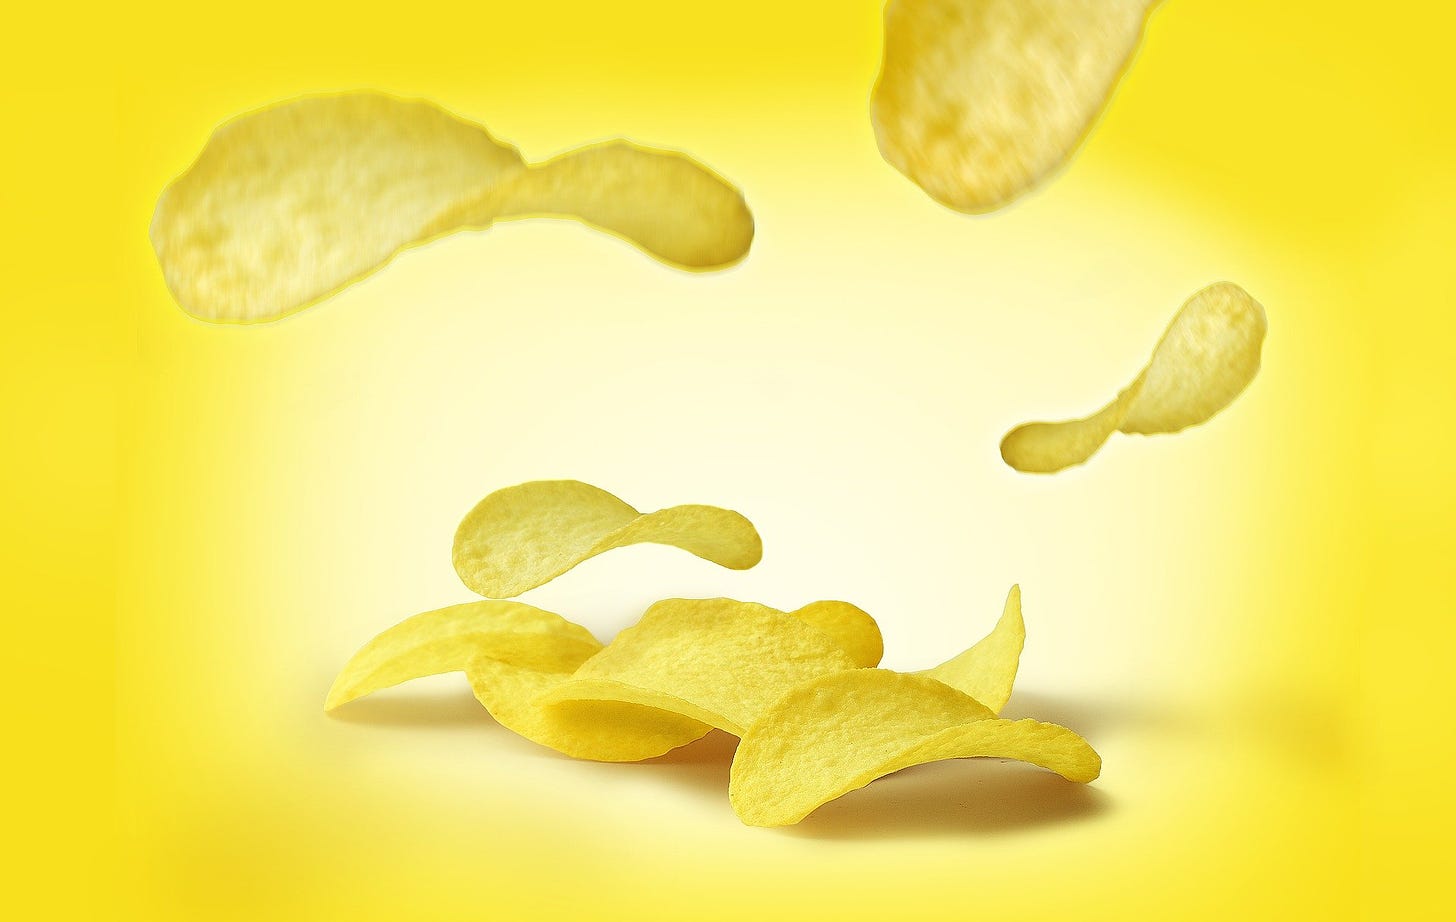 Chips or crisps. Tasty snacks might not be what they seem!